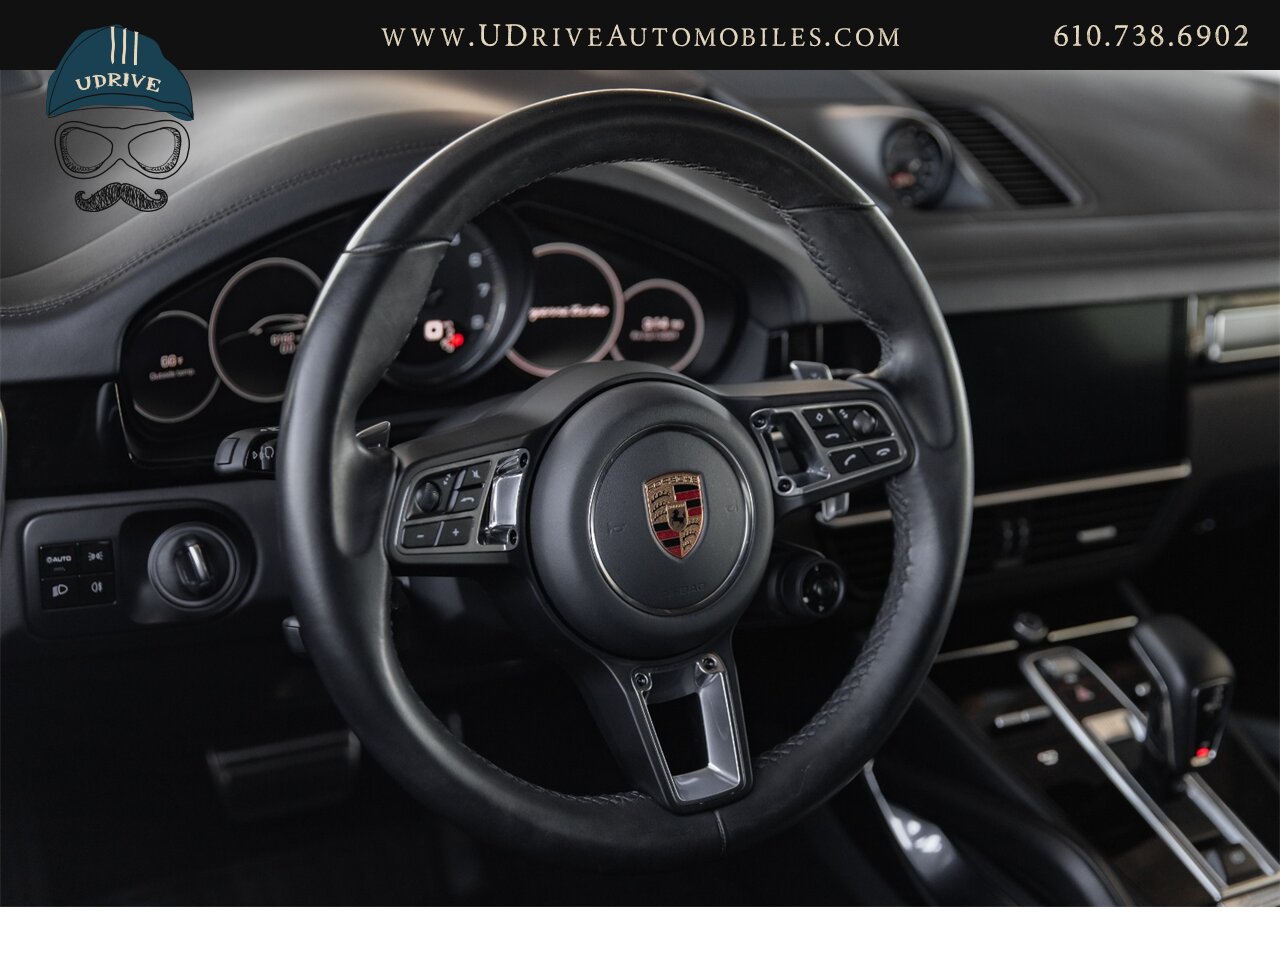 2020 Porsche Cayenne Turbo Coupe 2+1 Rear Comf Seats Prem Plus  22in Turbo Design Whls Sport Exhst Adap Cruise Surround View - Photo 29 - West Chester, PA 19382